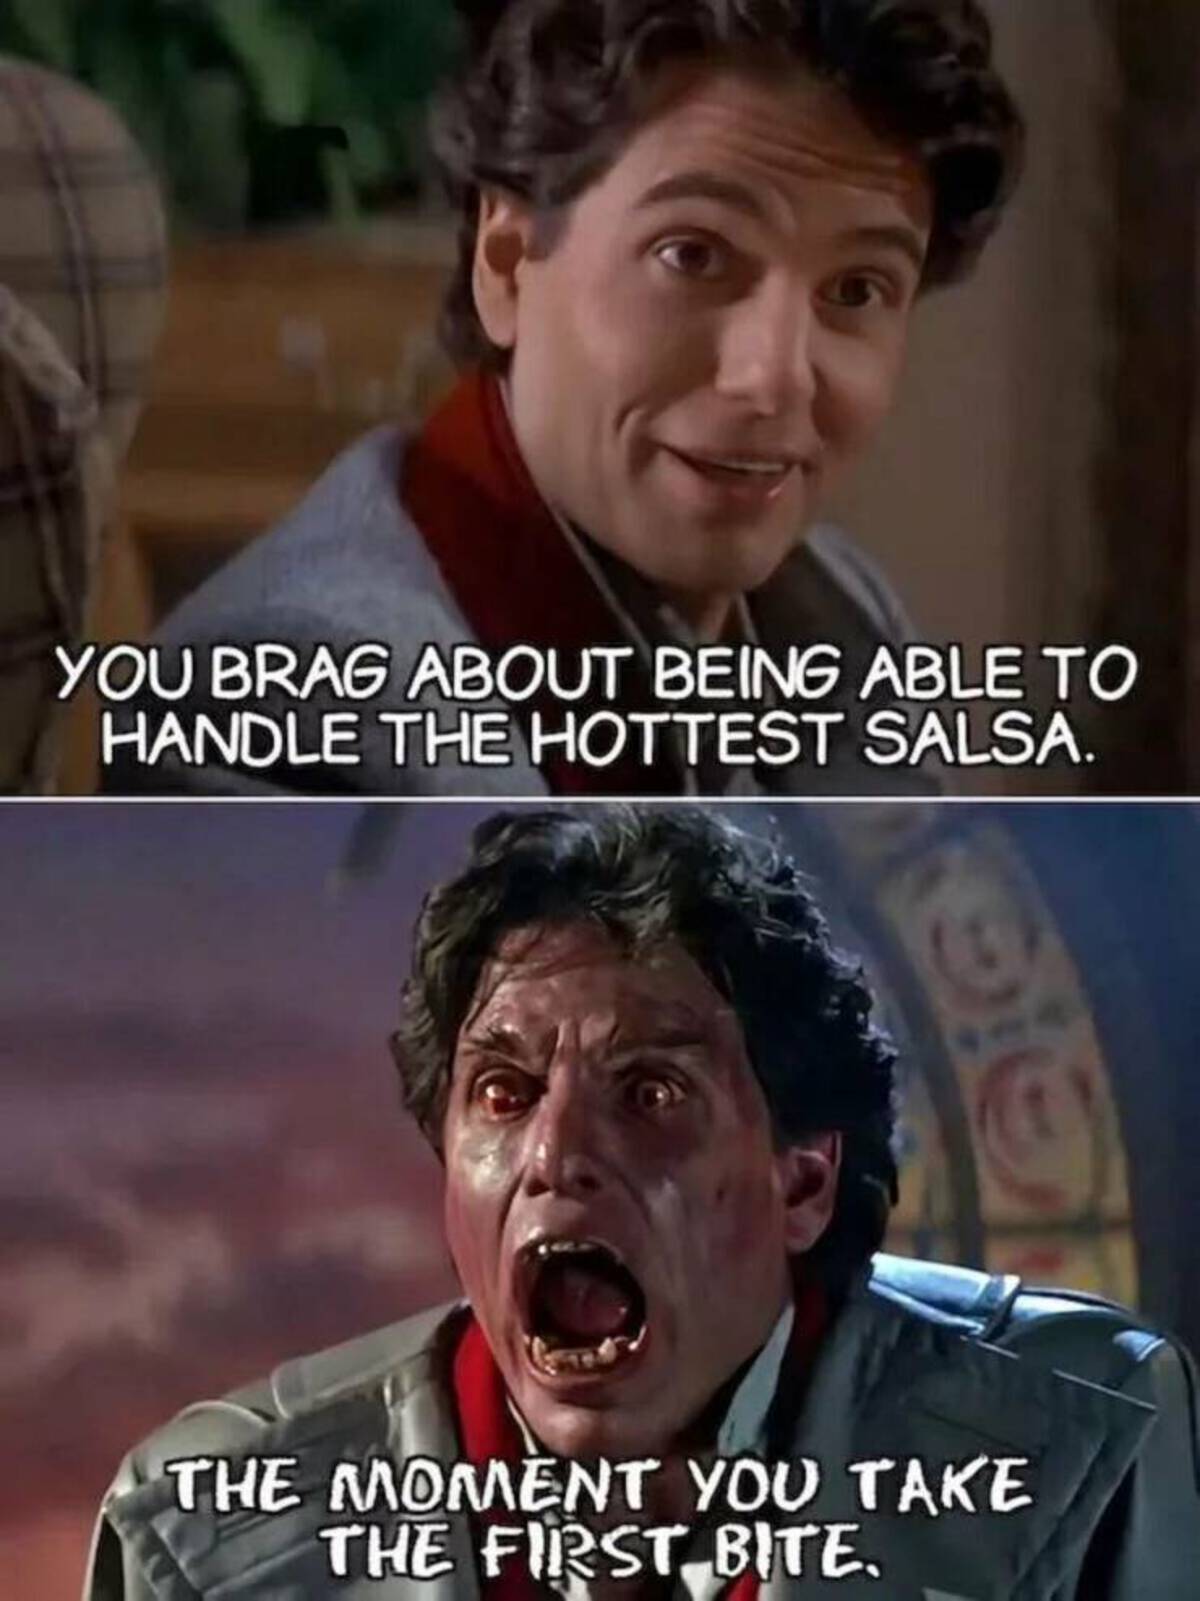 You Brag About Being Able To Handle The Hottest Salsa. The Moment You Take The First Bite.